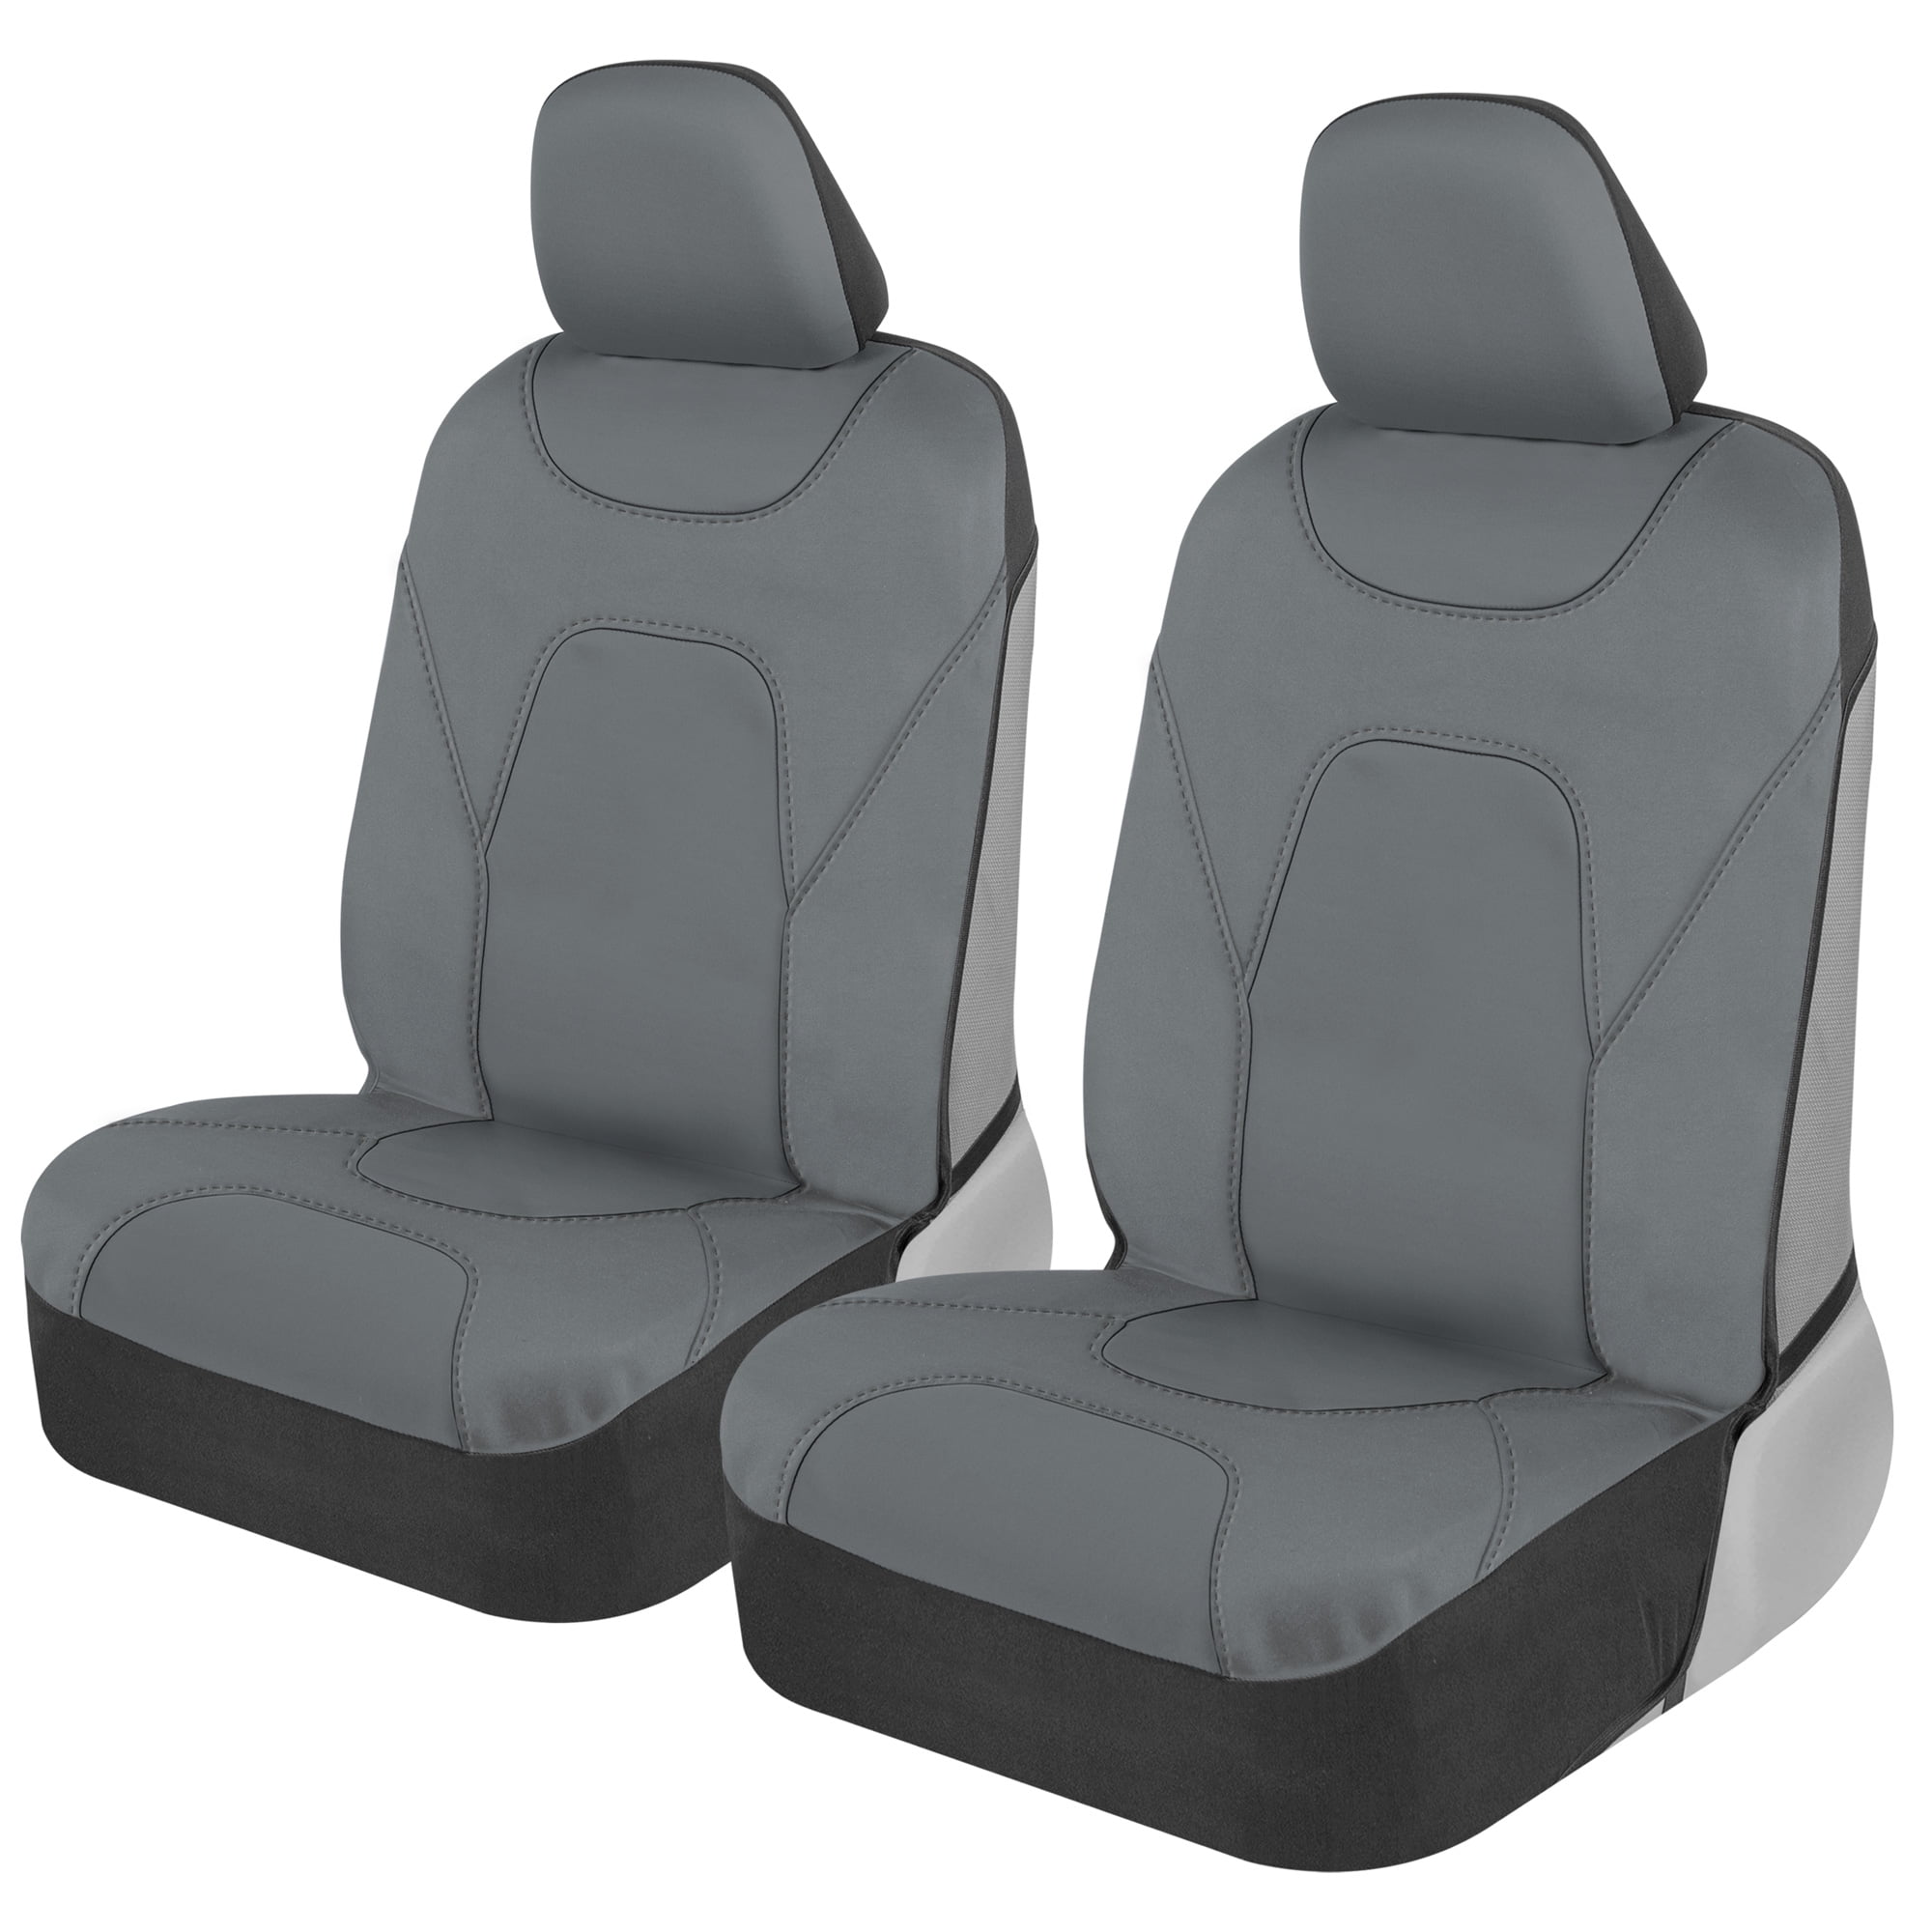 WeatherTech Seat Protector (Gray) Universal-fit bucket seat cover